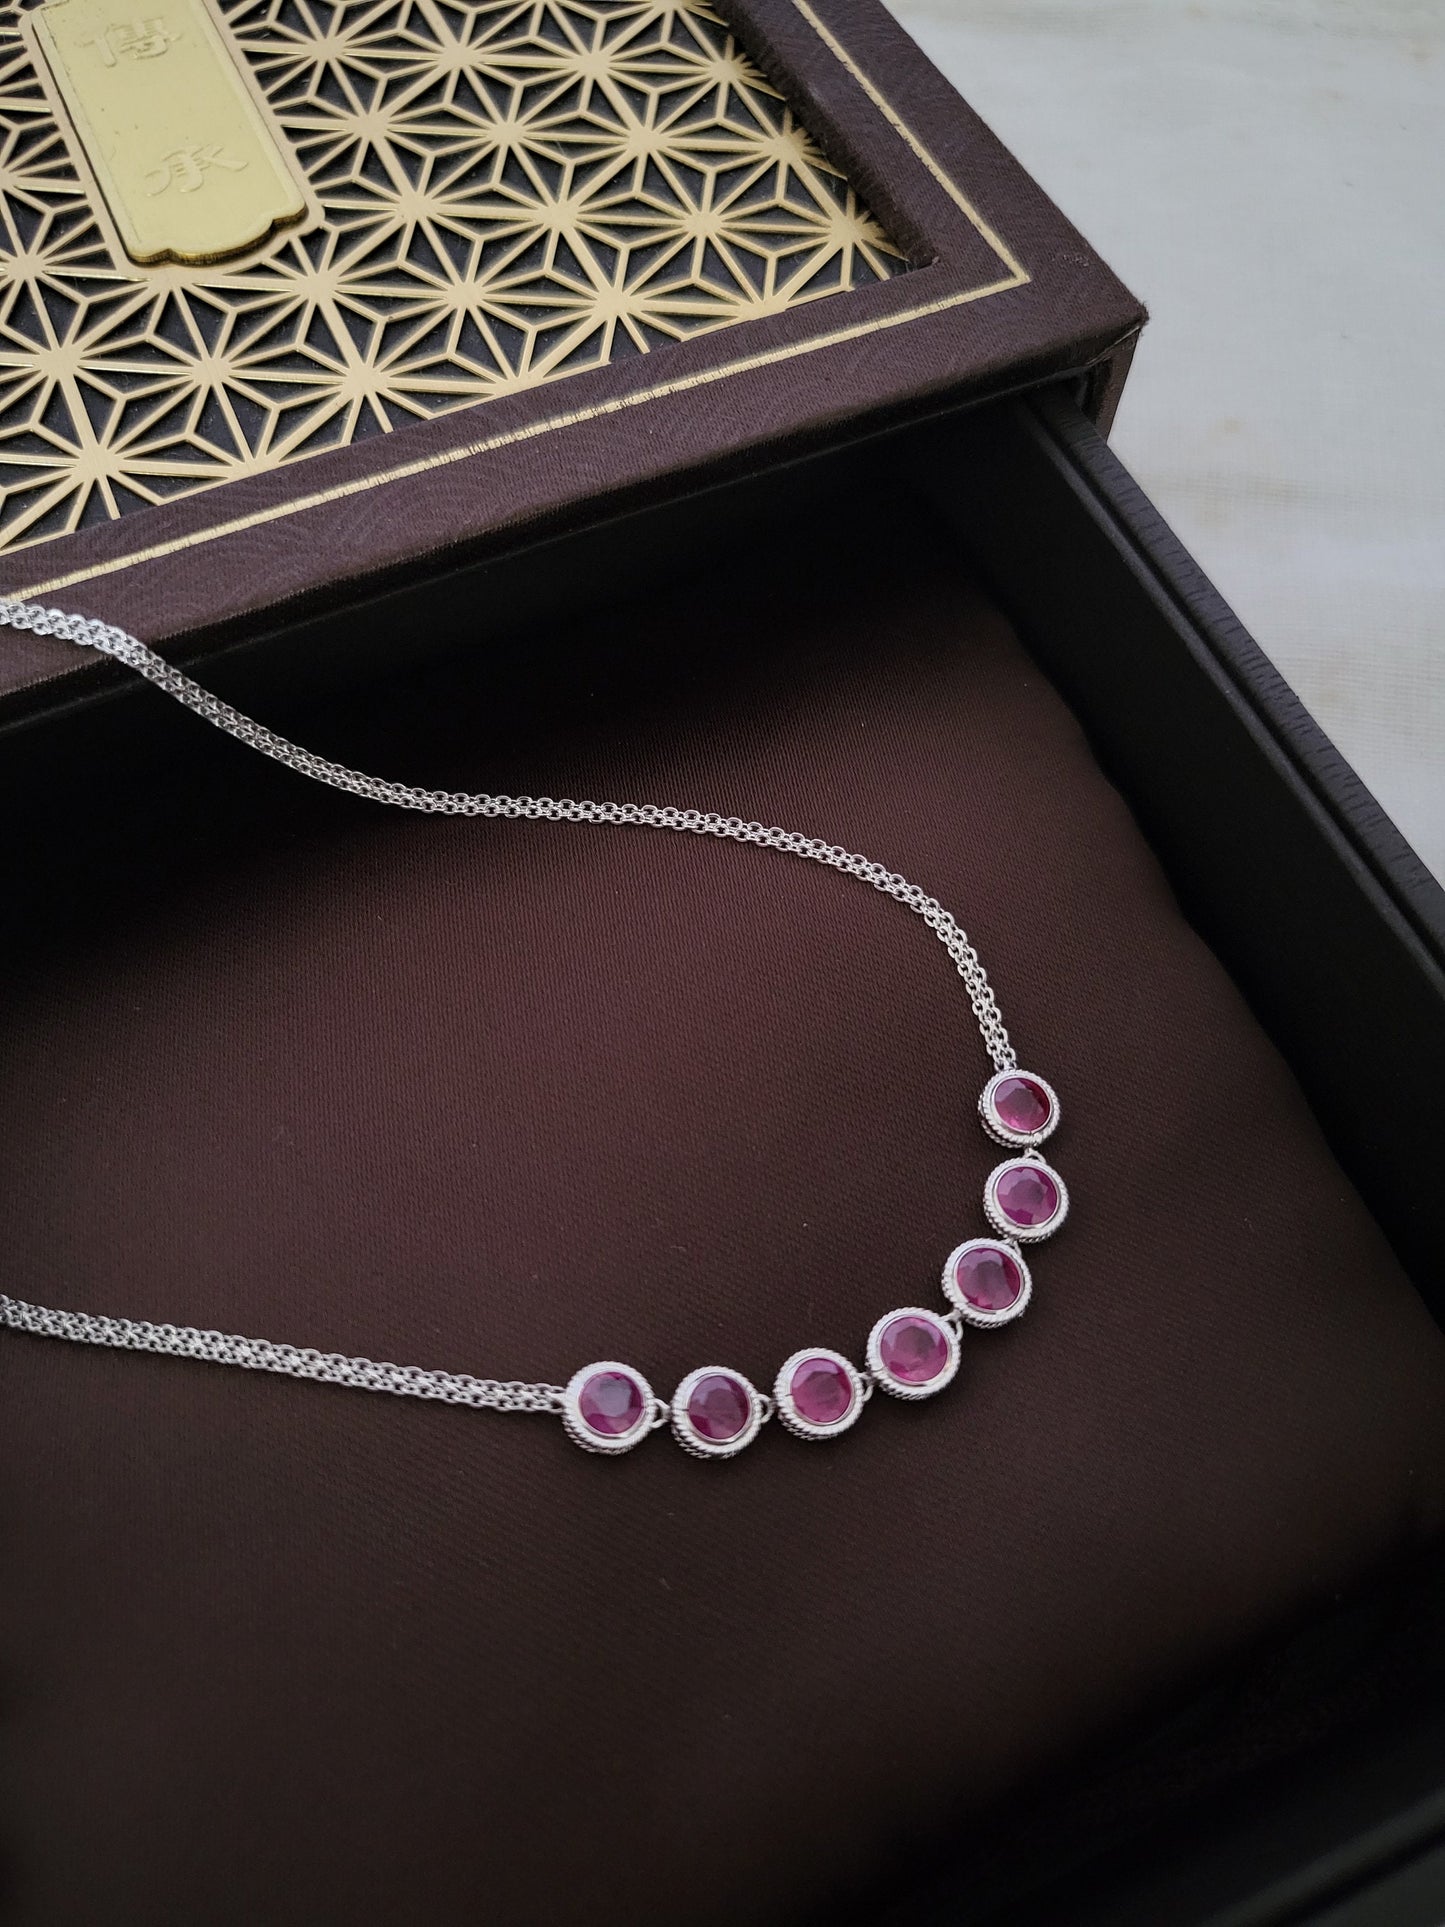 Thai Design 18K Natural Red Burma Burmese Ruby Solid White Gold Necklace Rare Gemstone Dainty